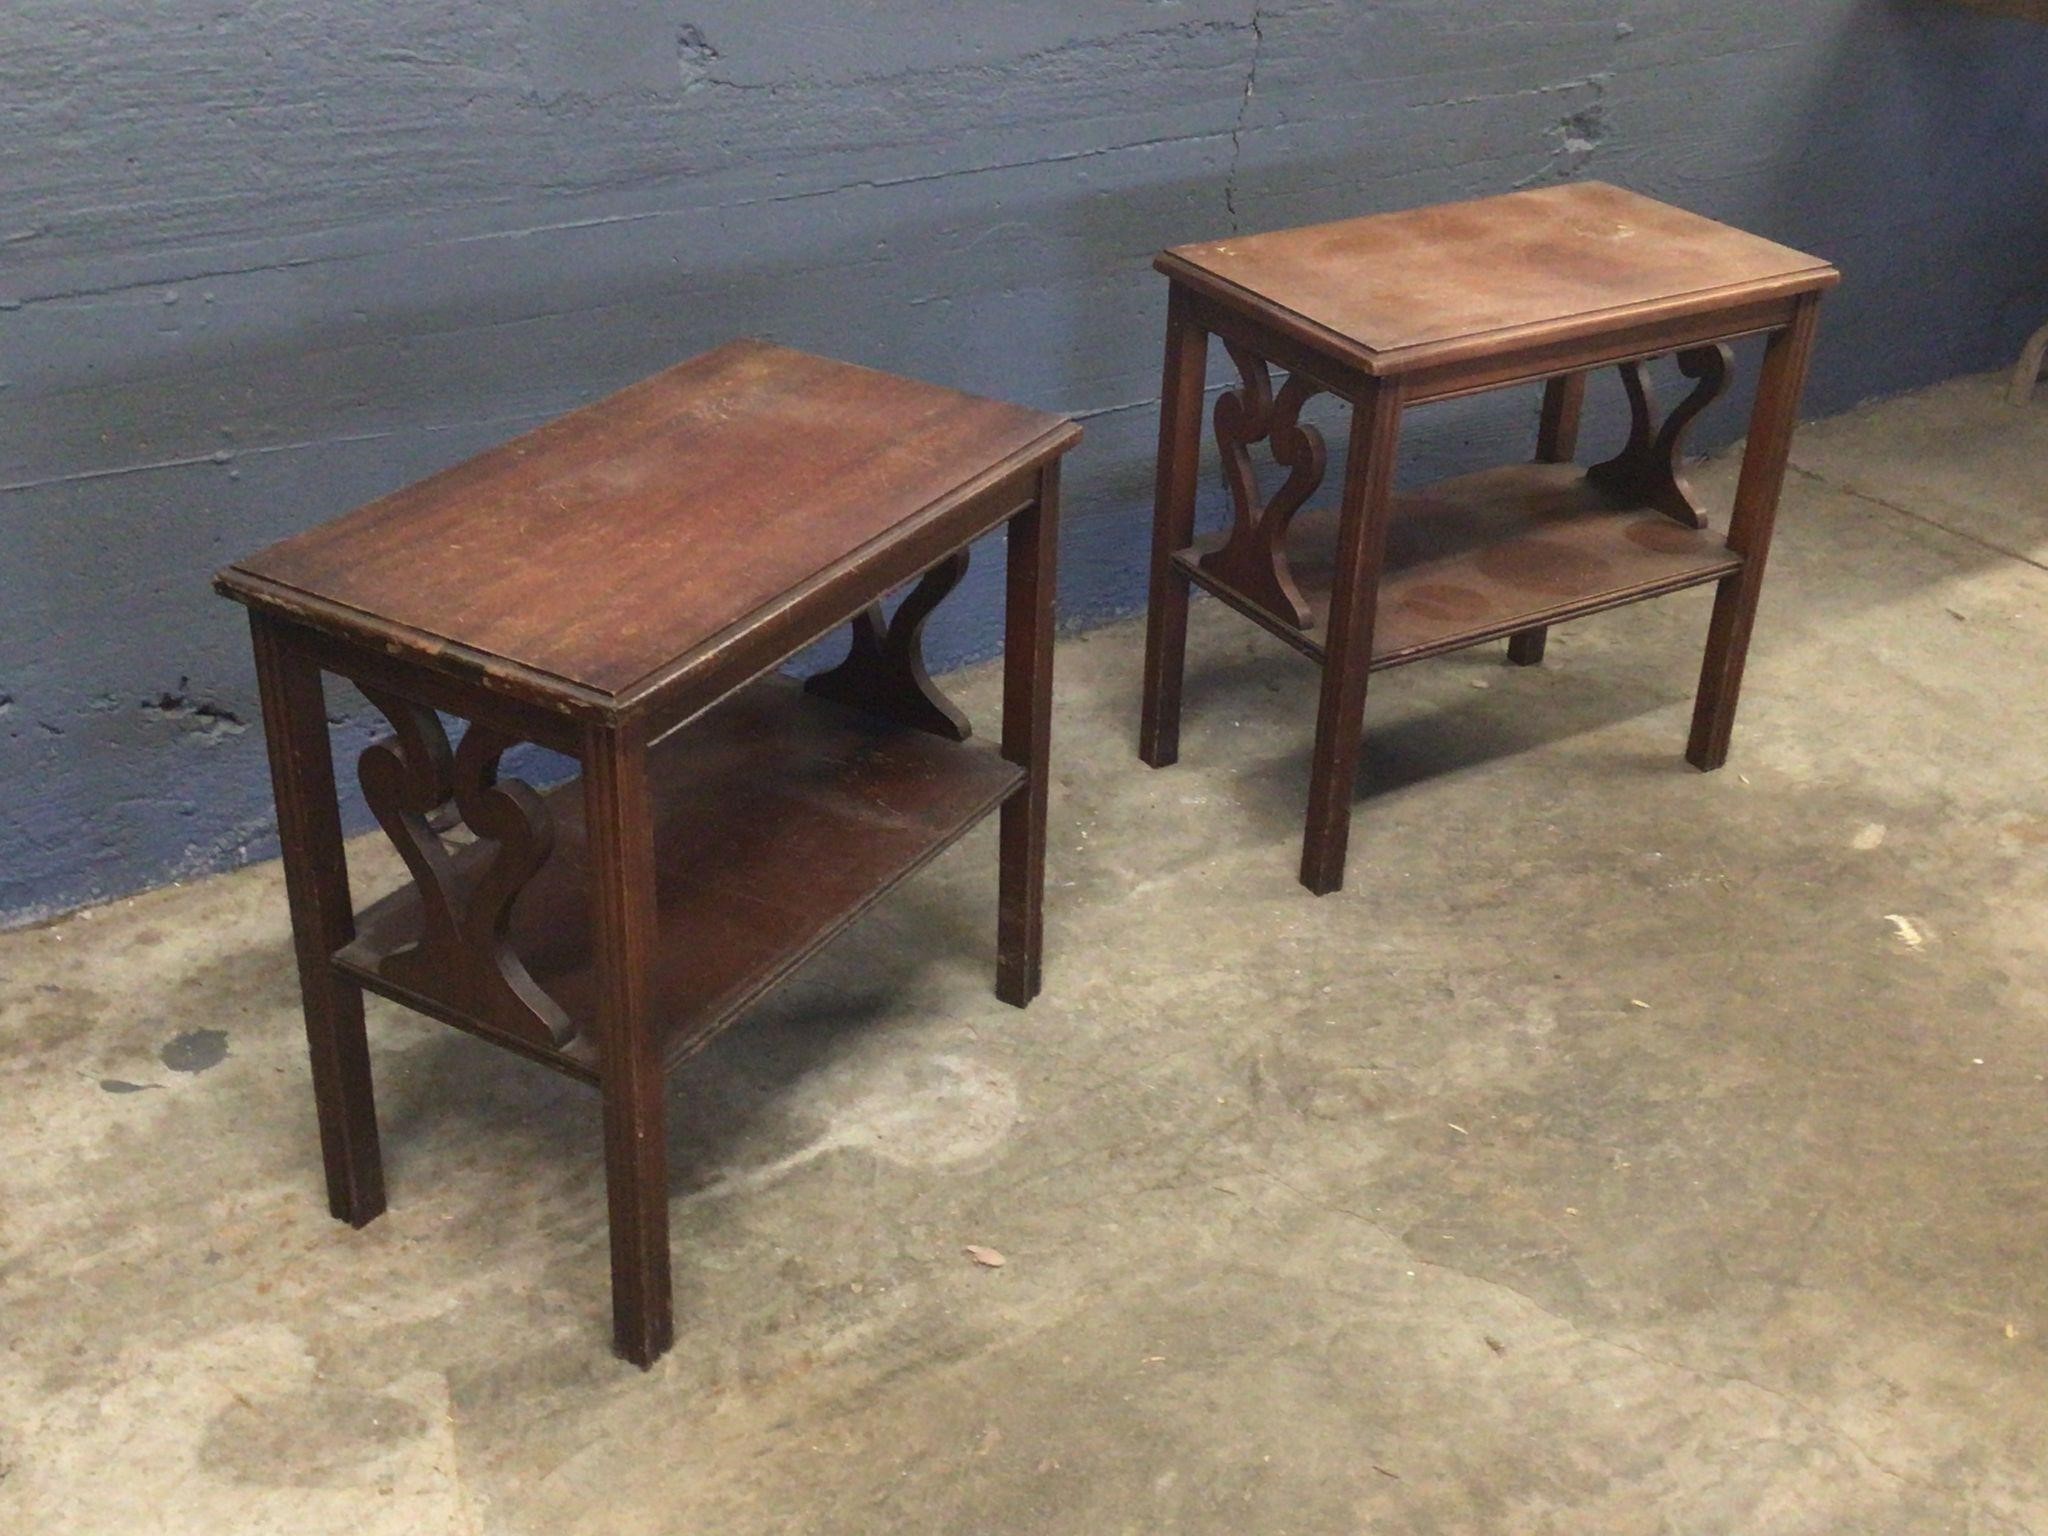 2 MATCHING WOOD STANDS